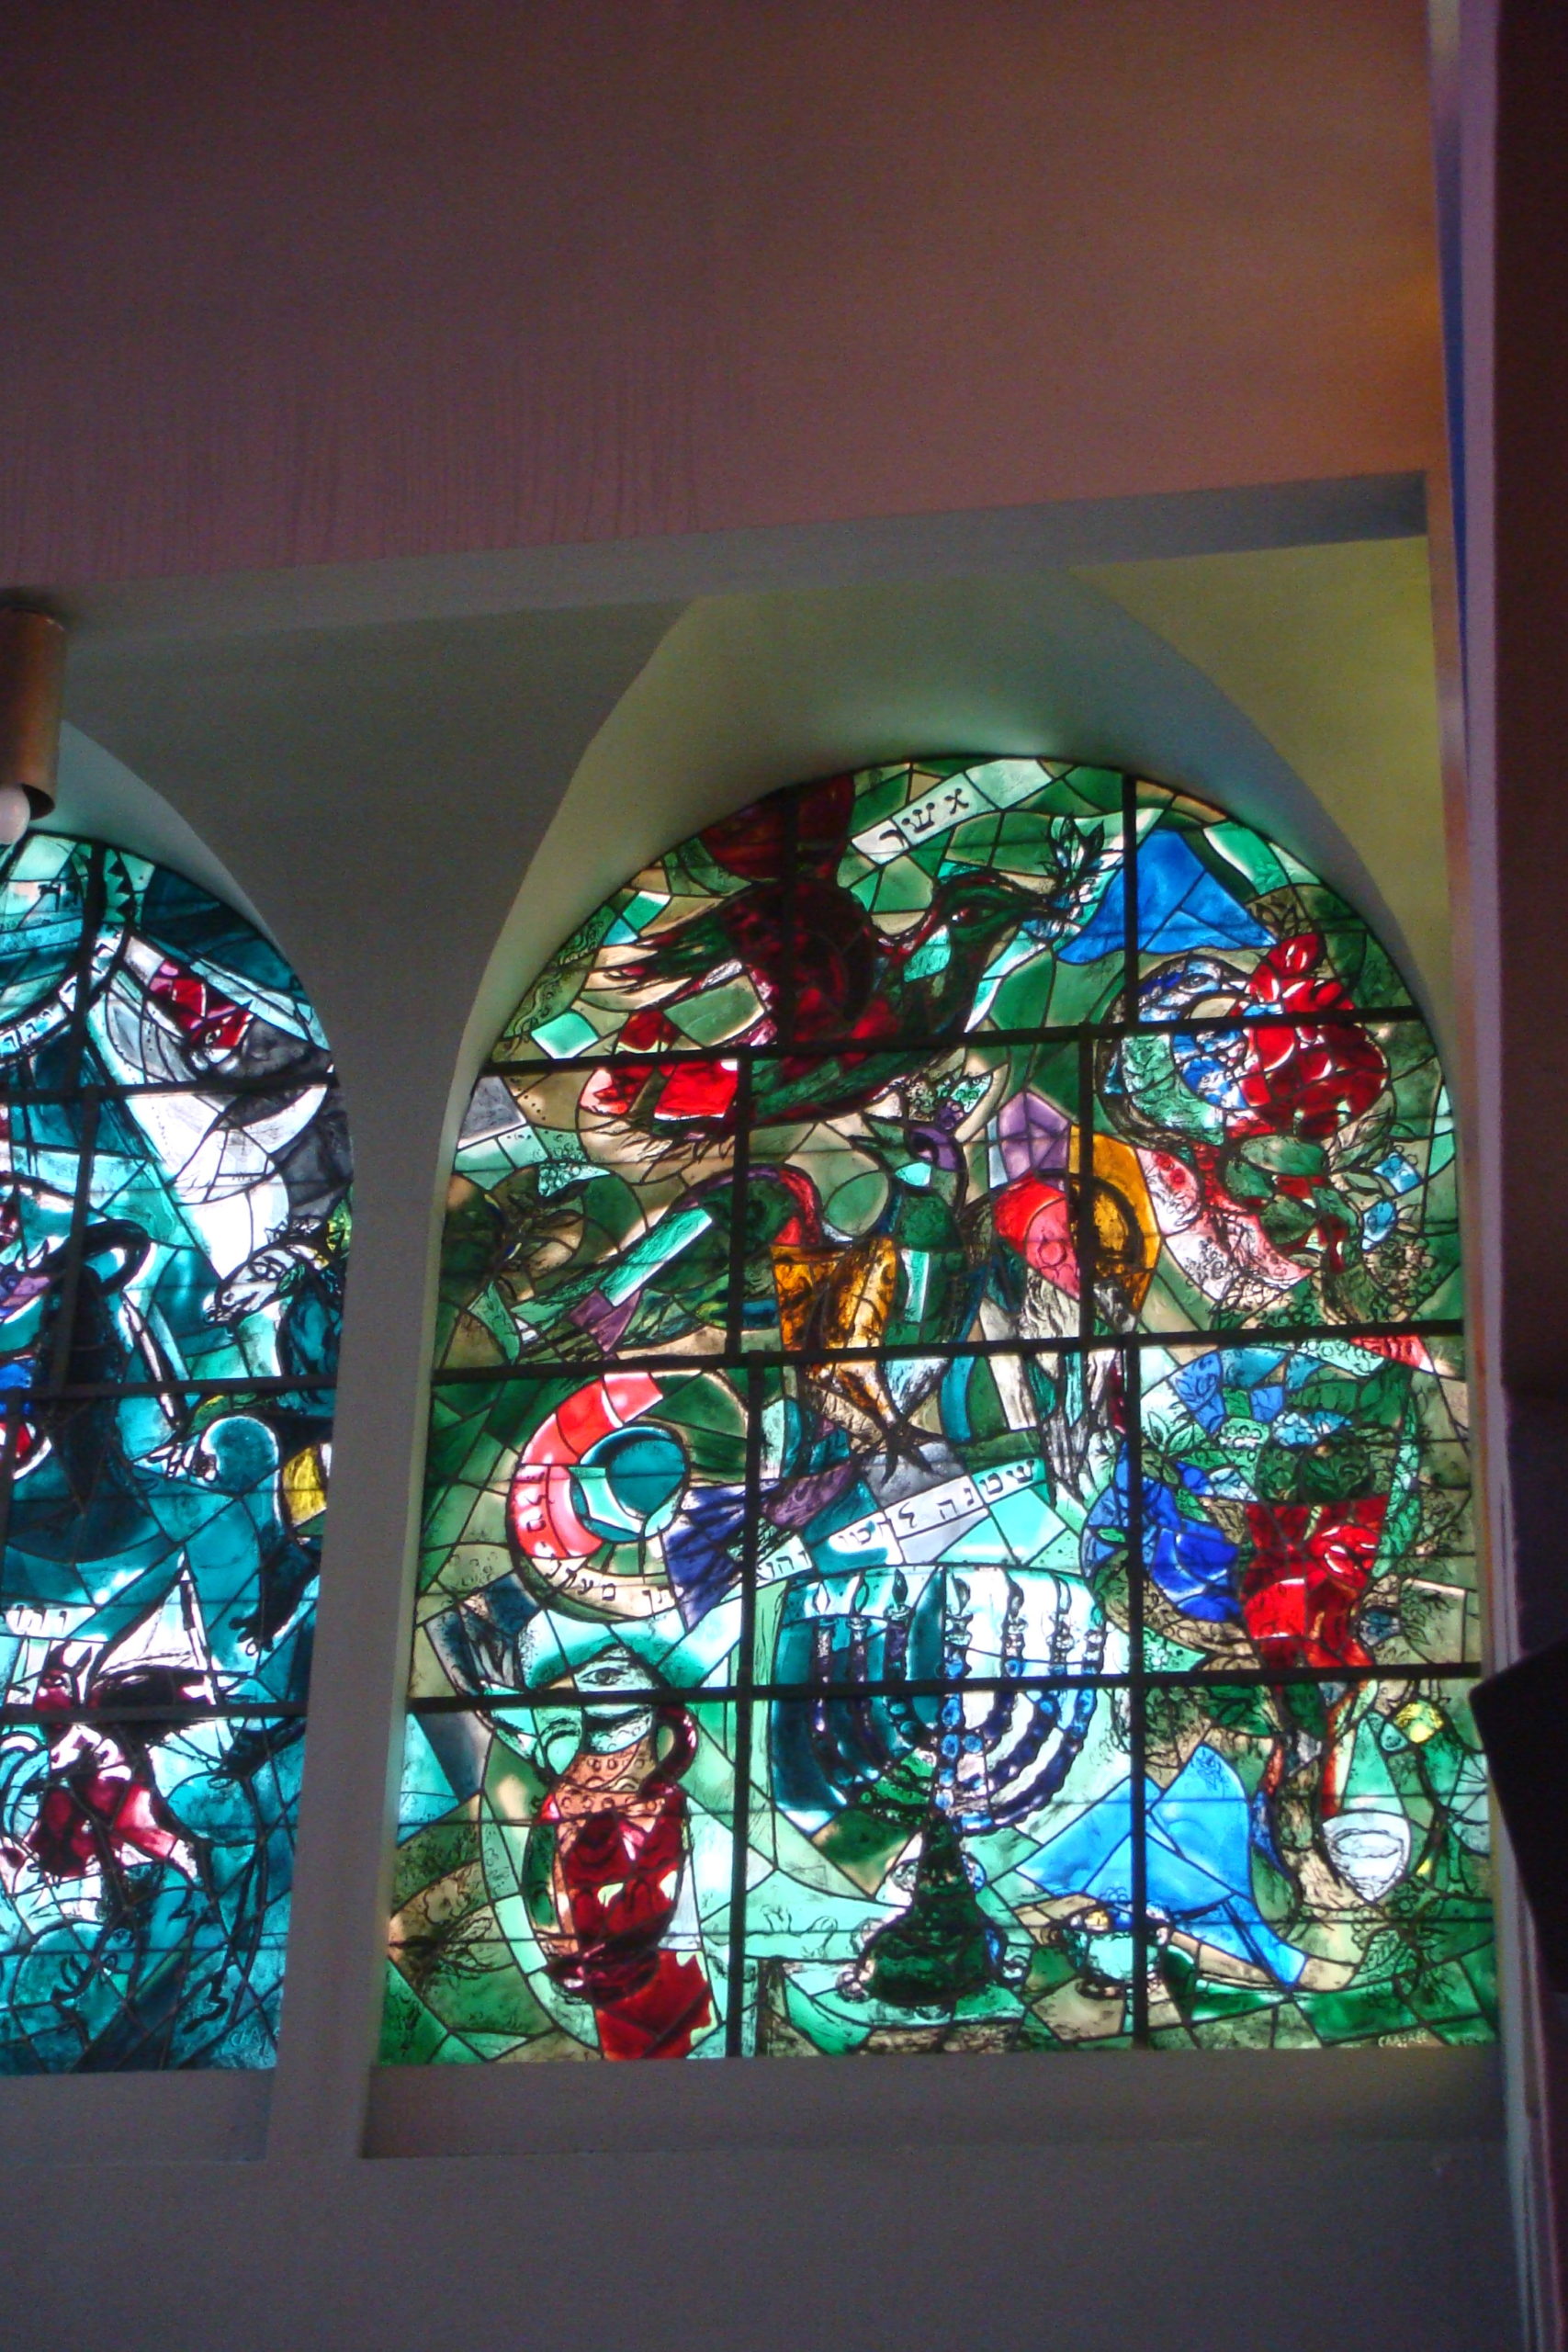 Marc Chagall & His 12 stained glass windows in Jerusalem – Public 